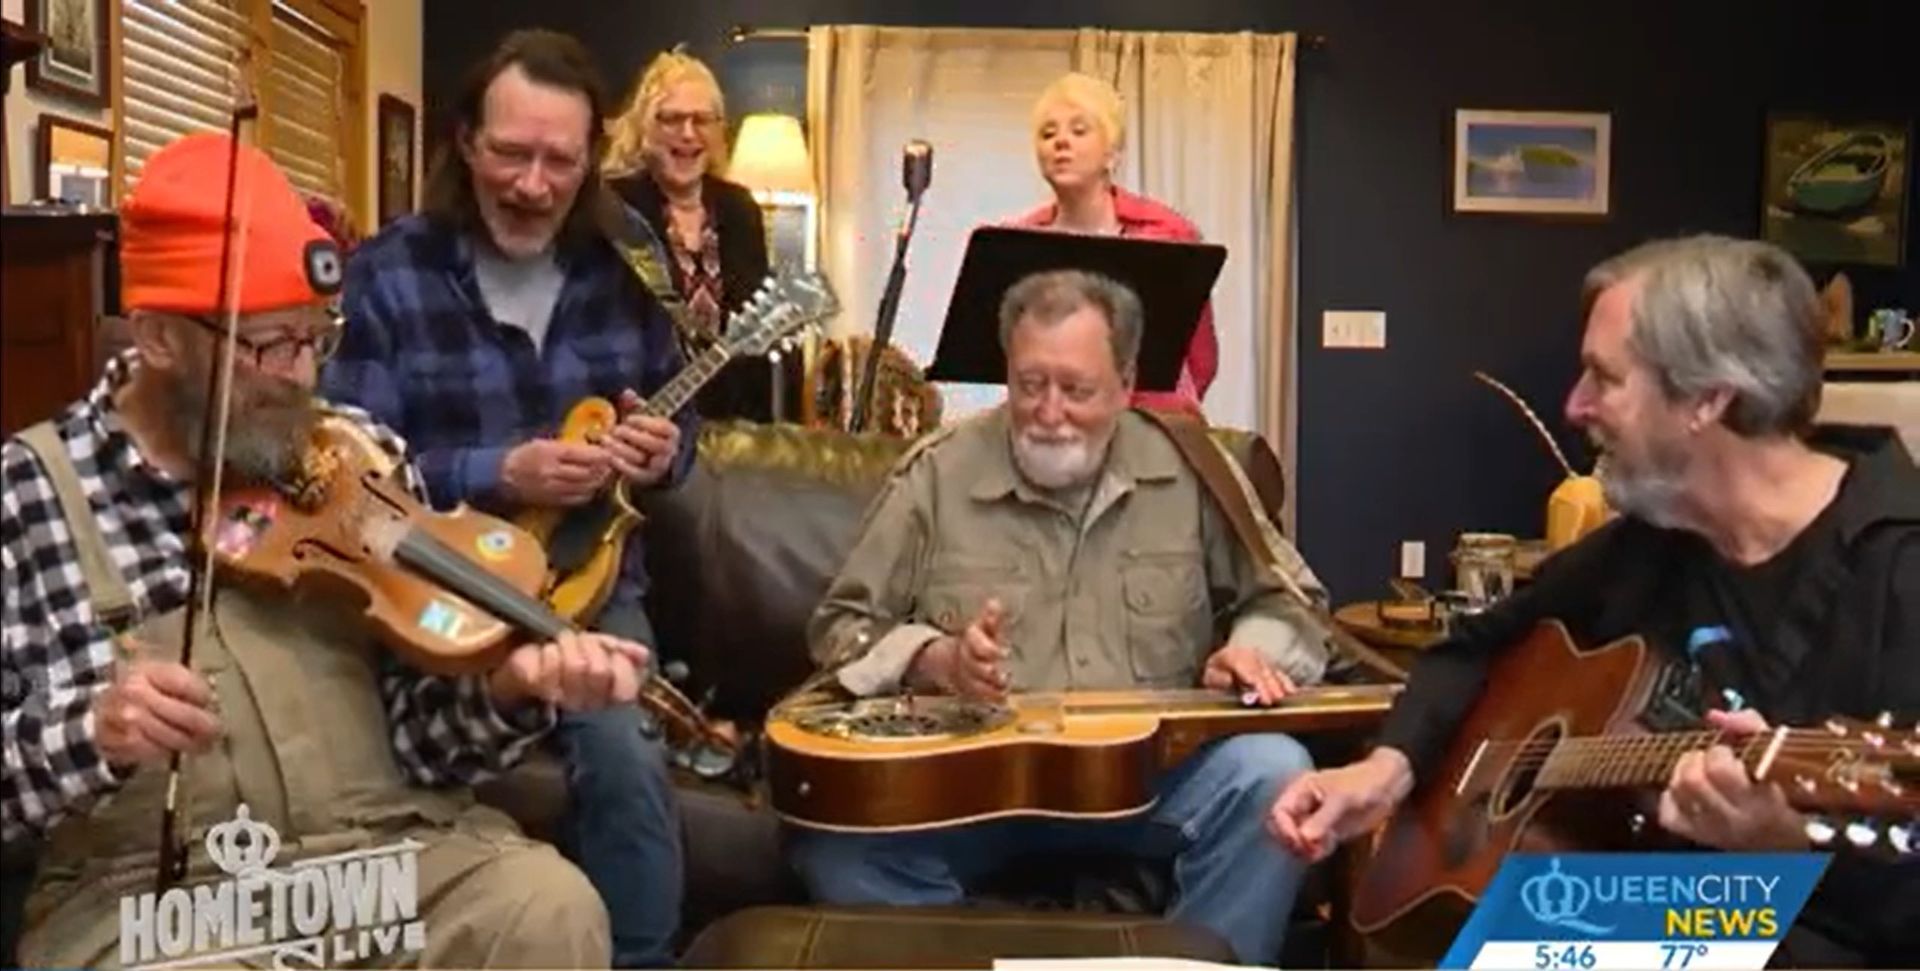 A group of men are playing guitars and violins in a living room.